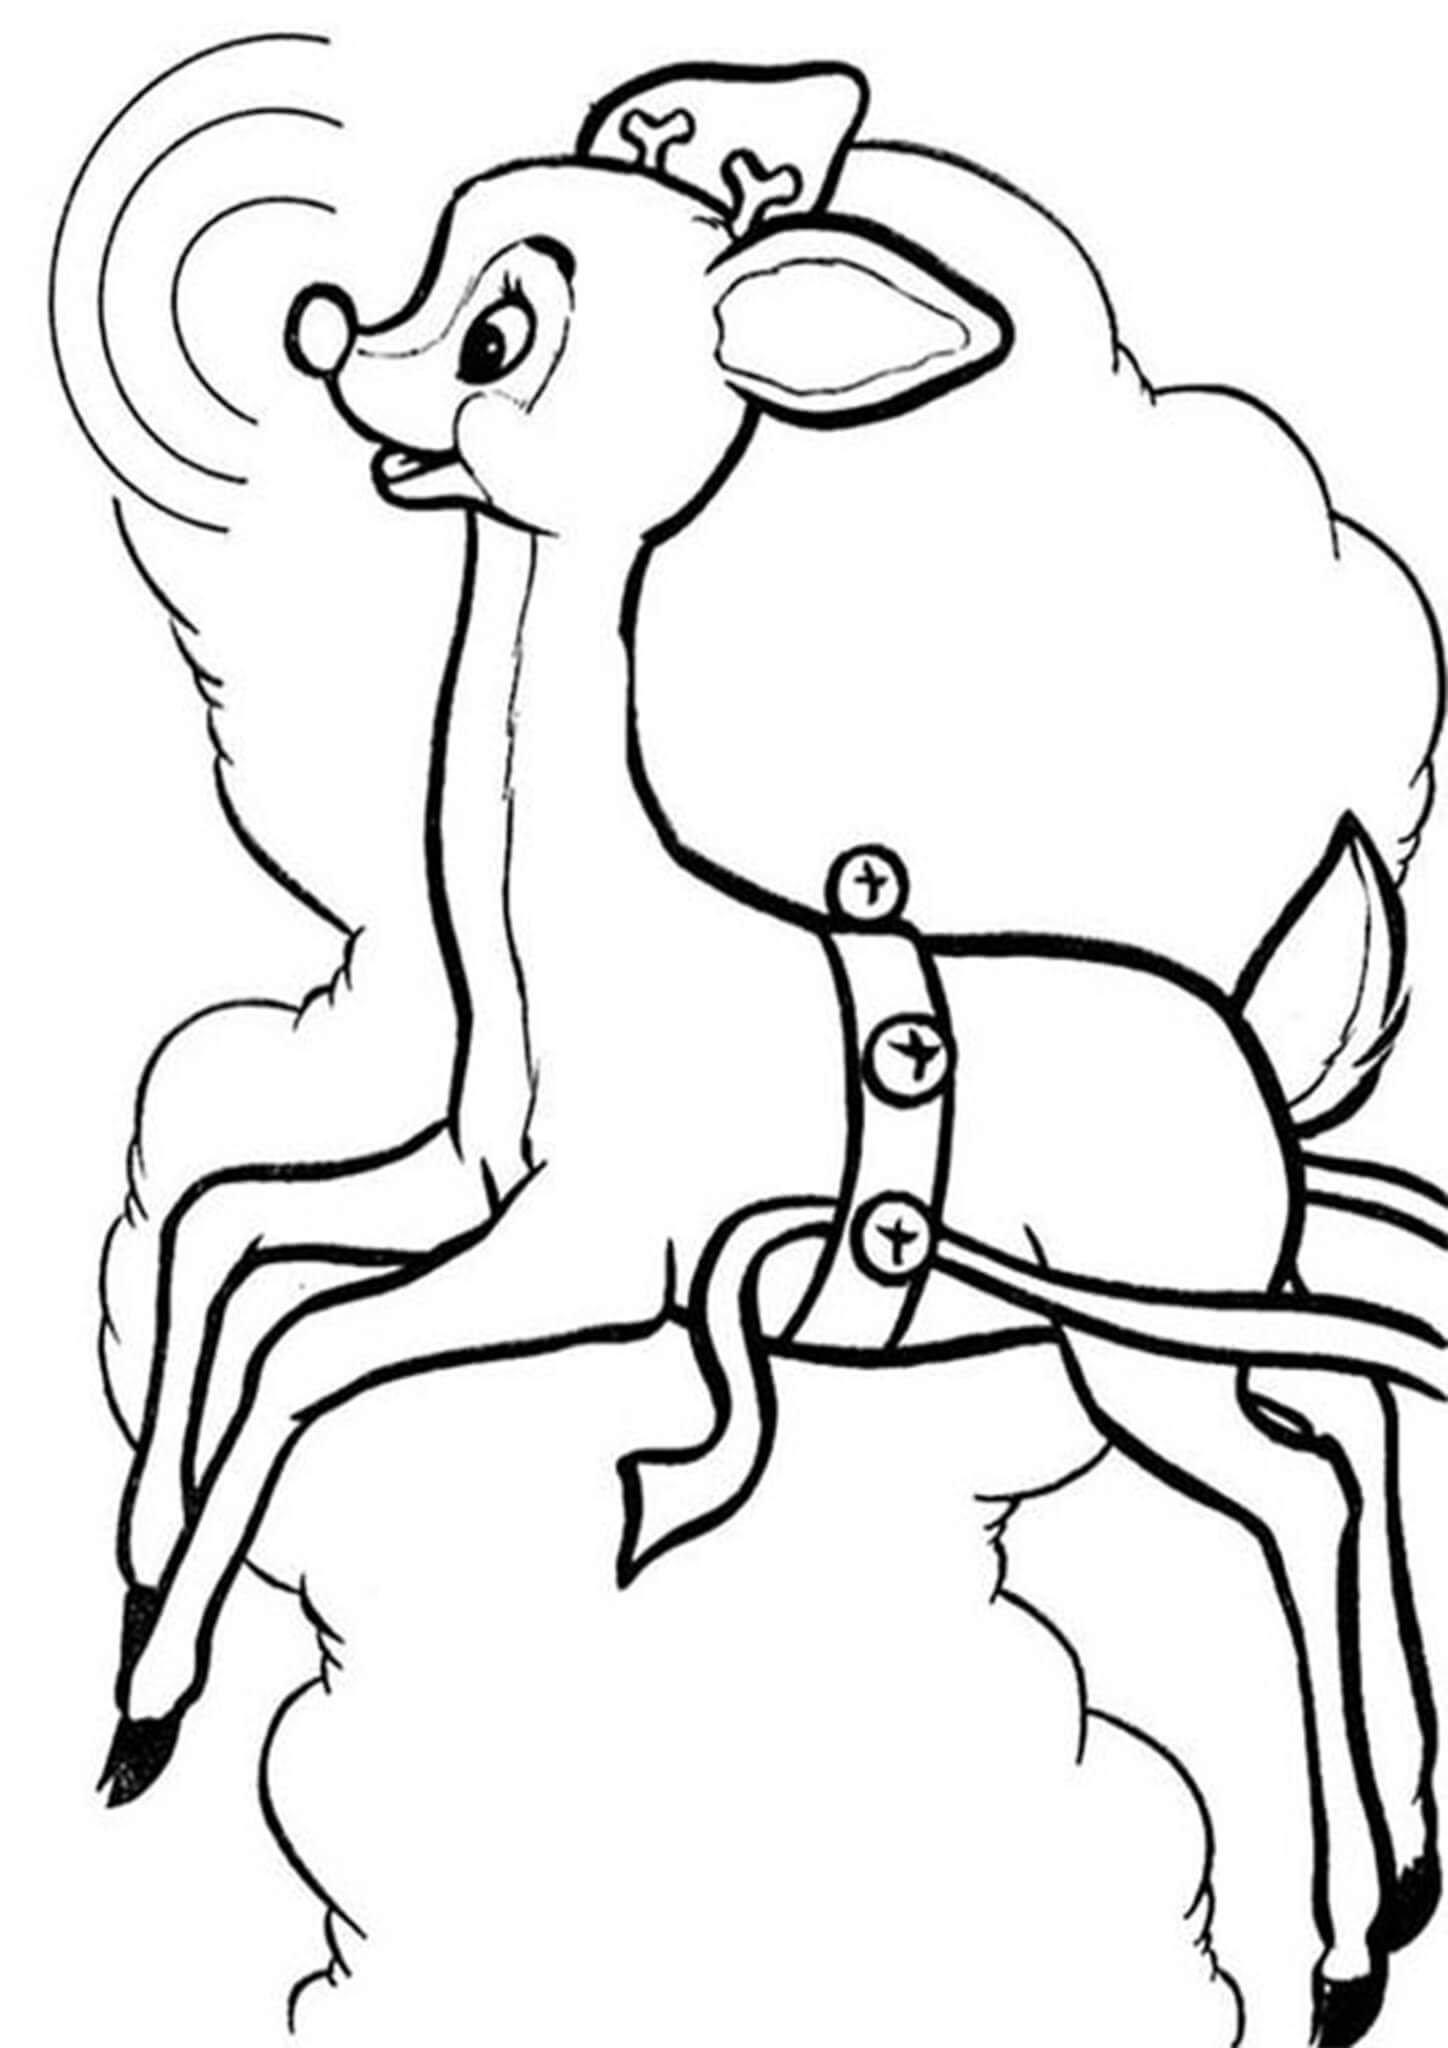 Rudolph The Red Nosed Reindeer Coloring Pages - Tulamama